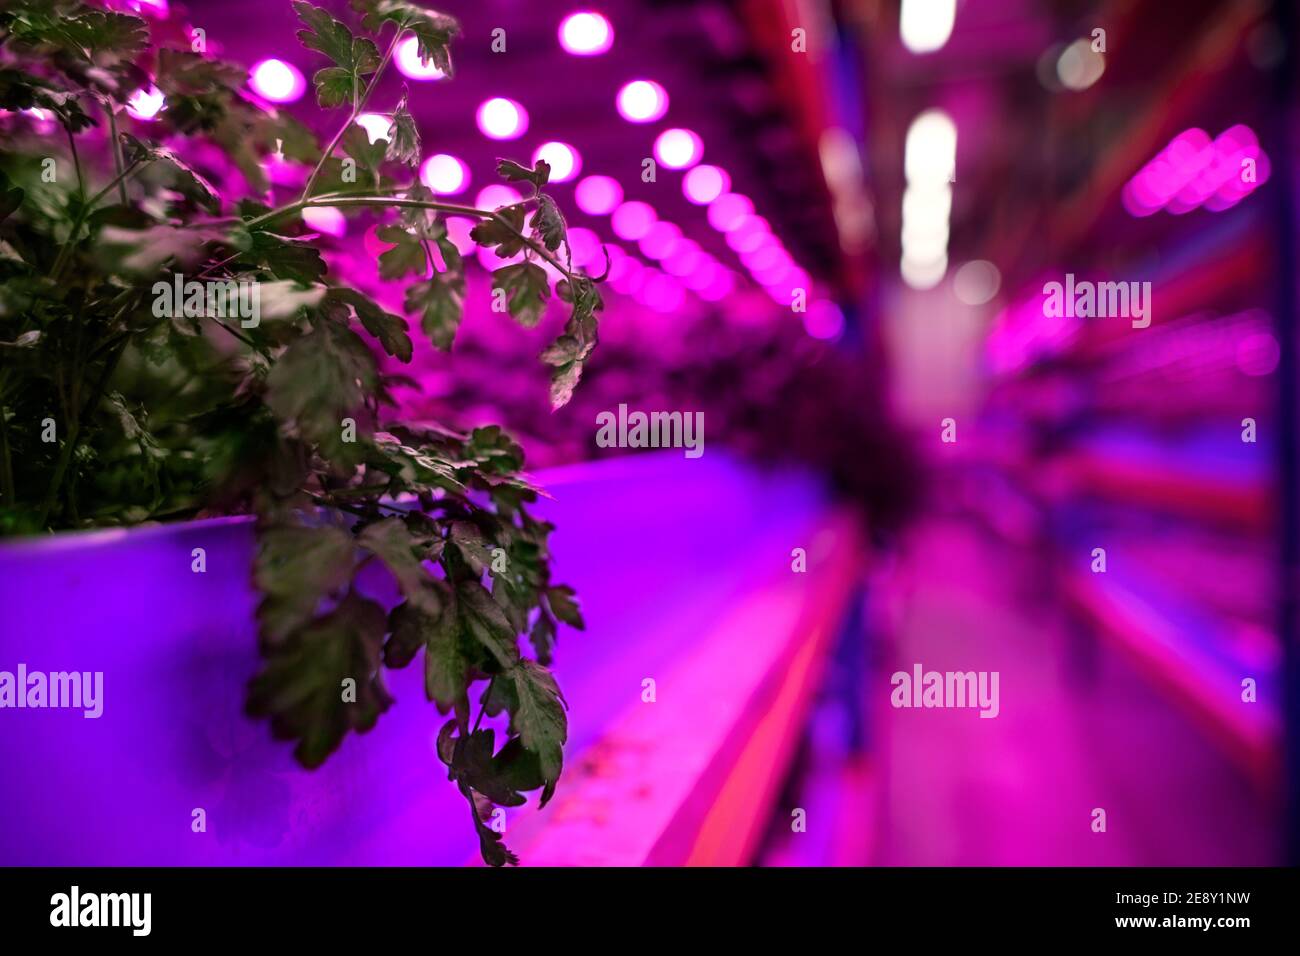 Aquaponic farm, sustainable business and artificial lighting. Stock Photo